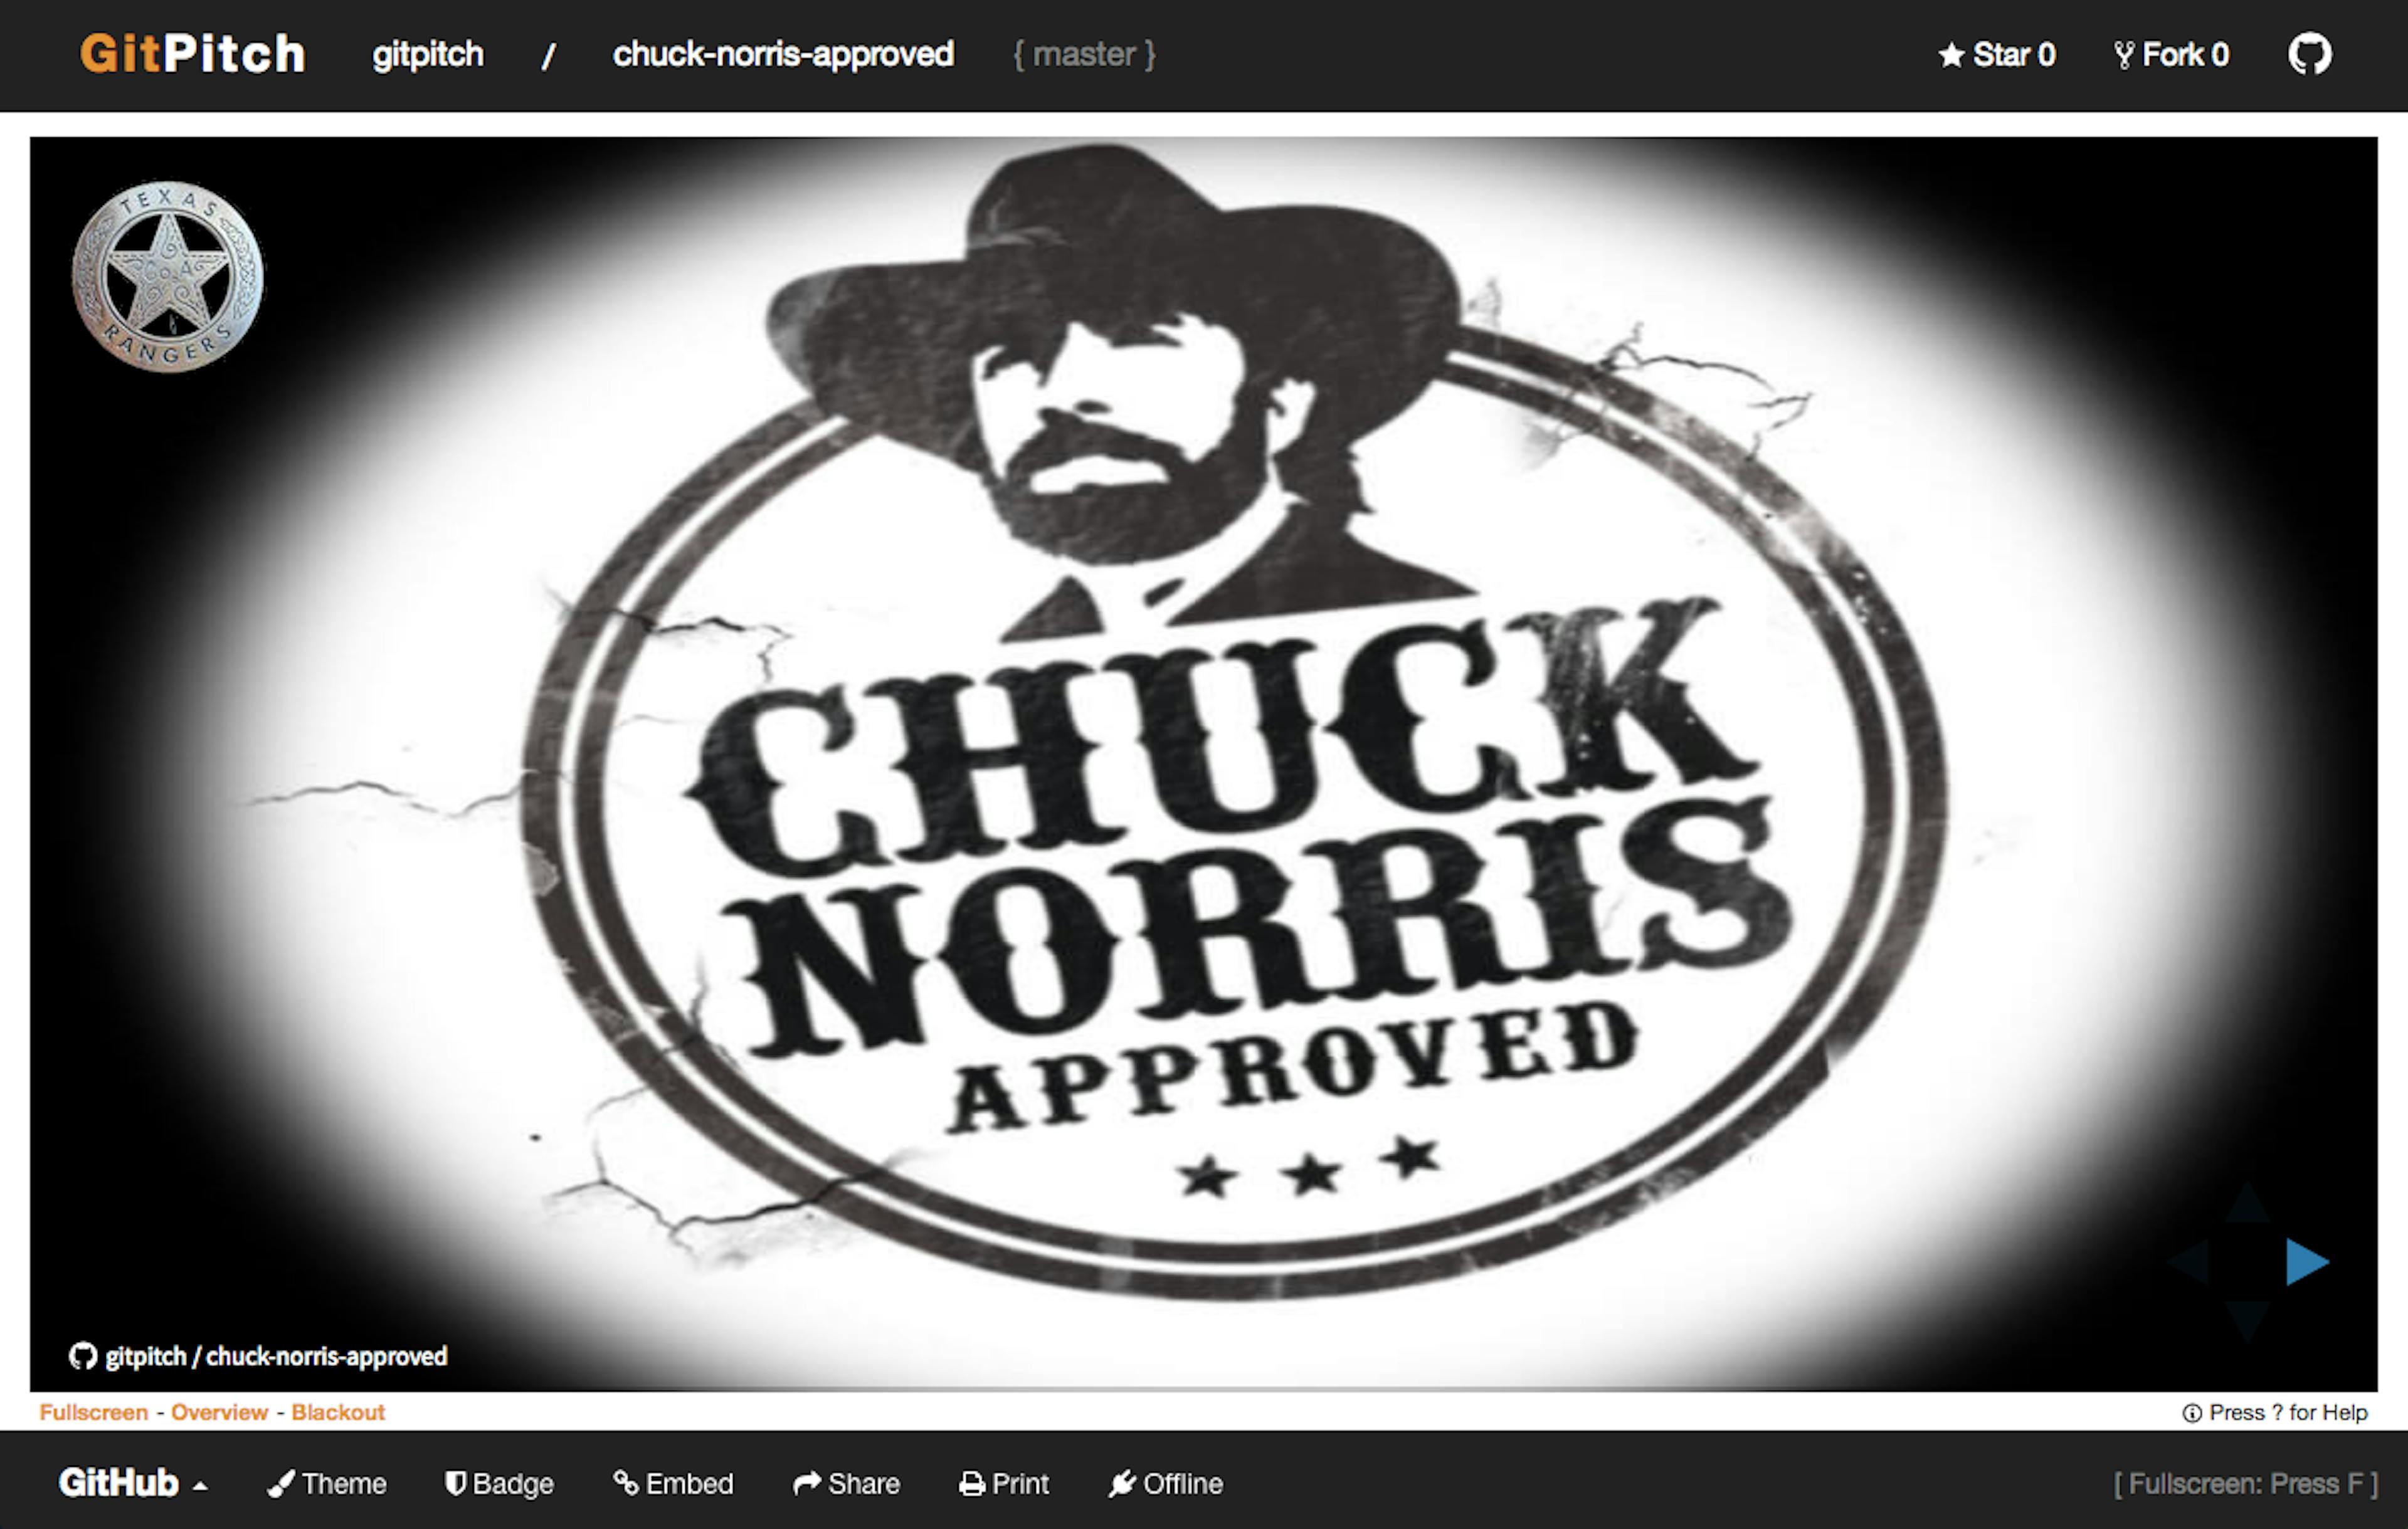 featured image - Chuck Norris Approved!